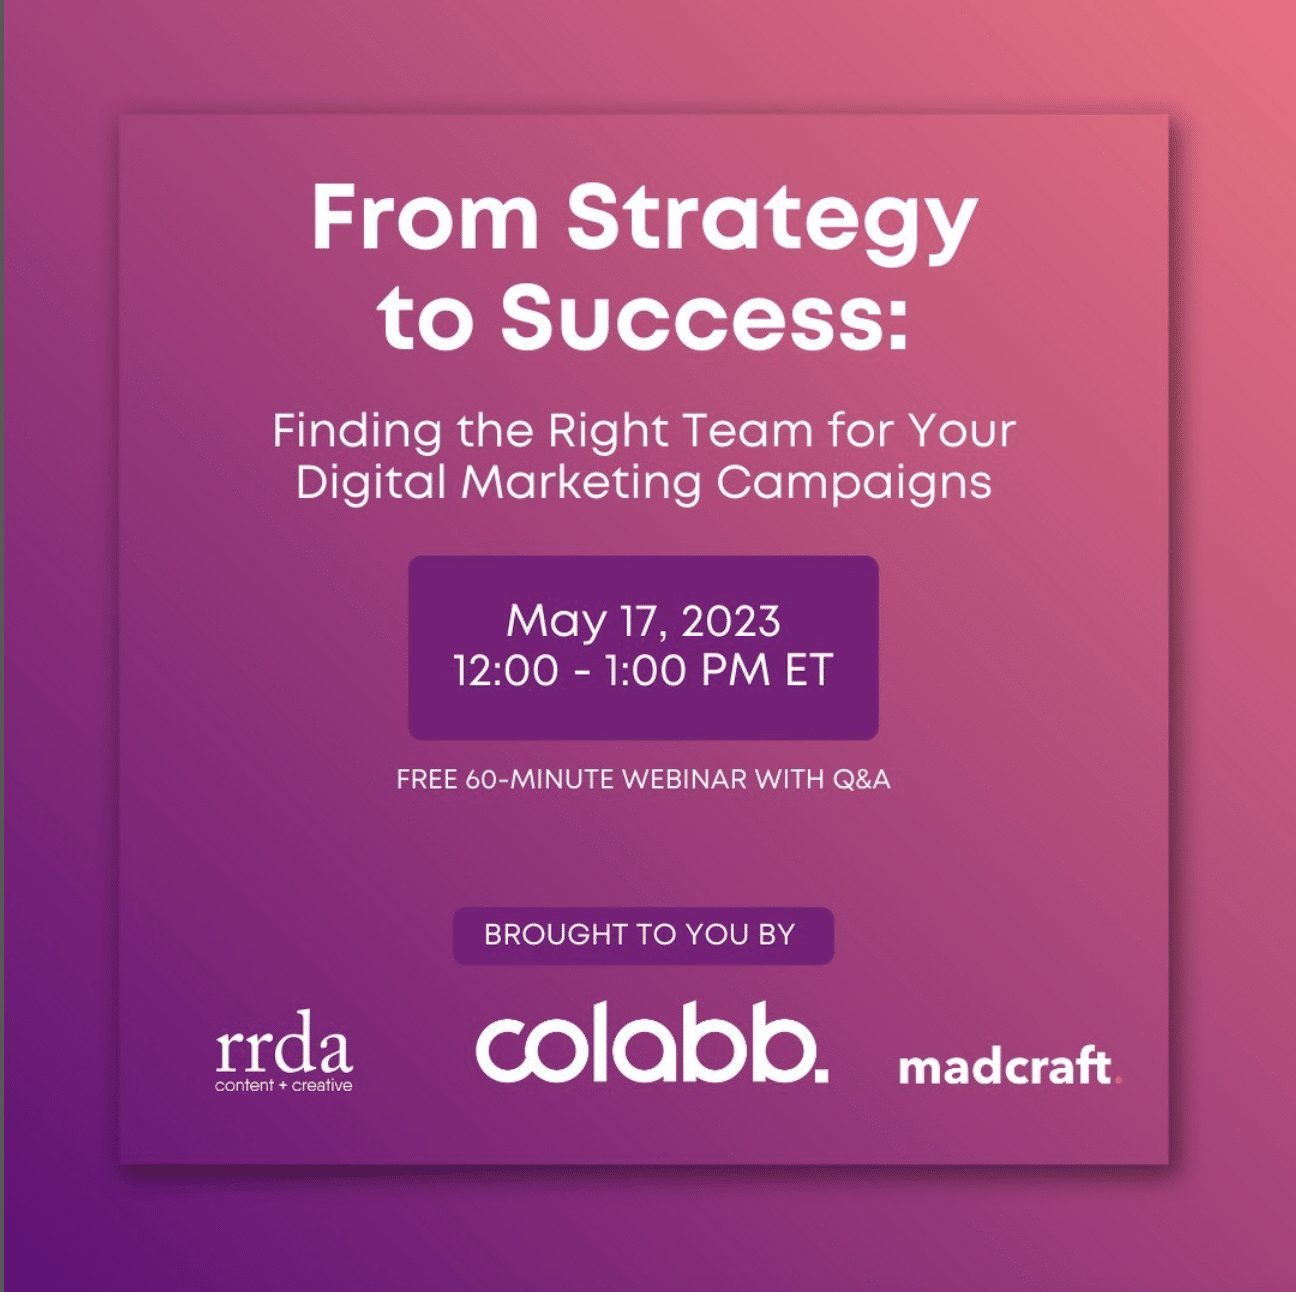 From strategy to success poster | Events and webinars hosted by Colabb